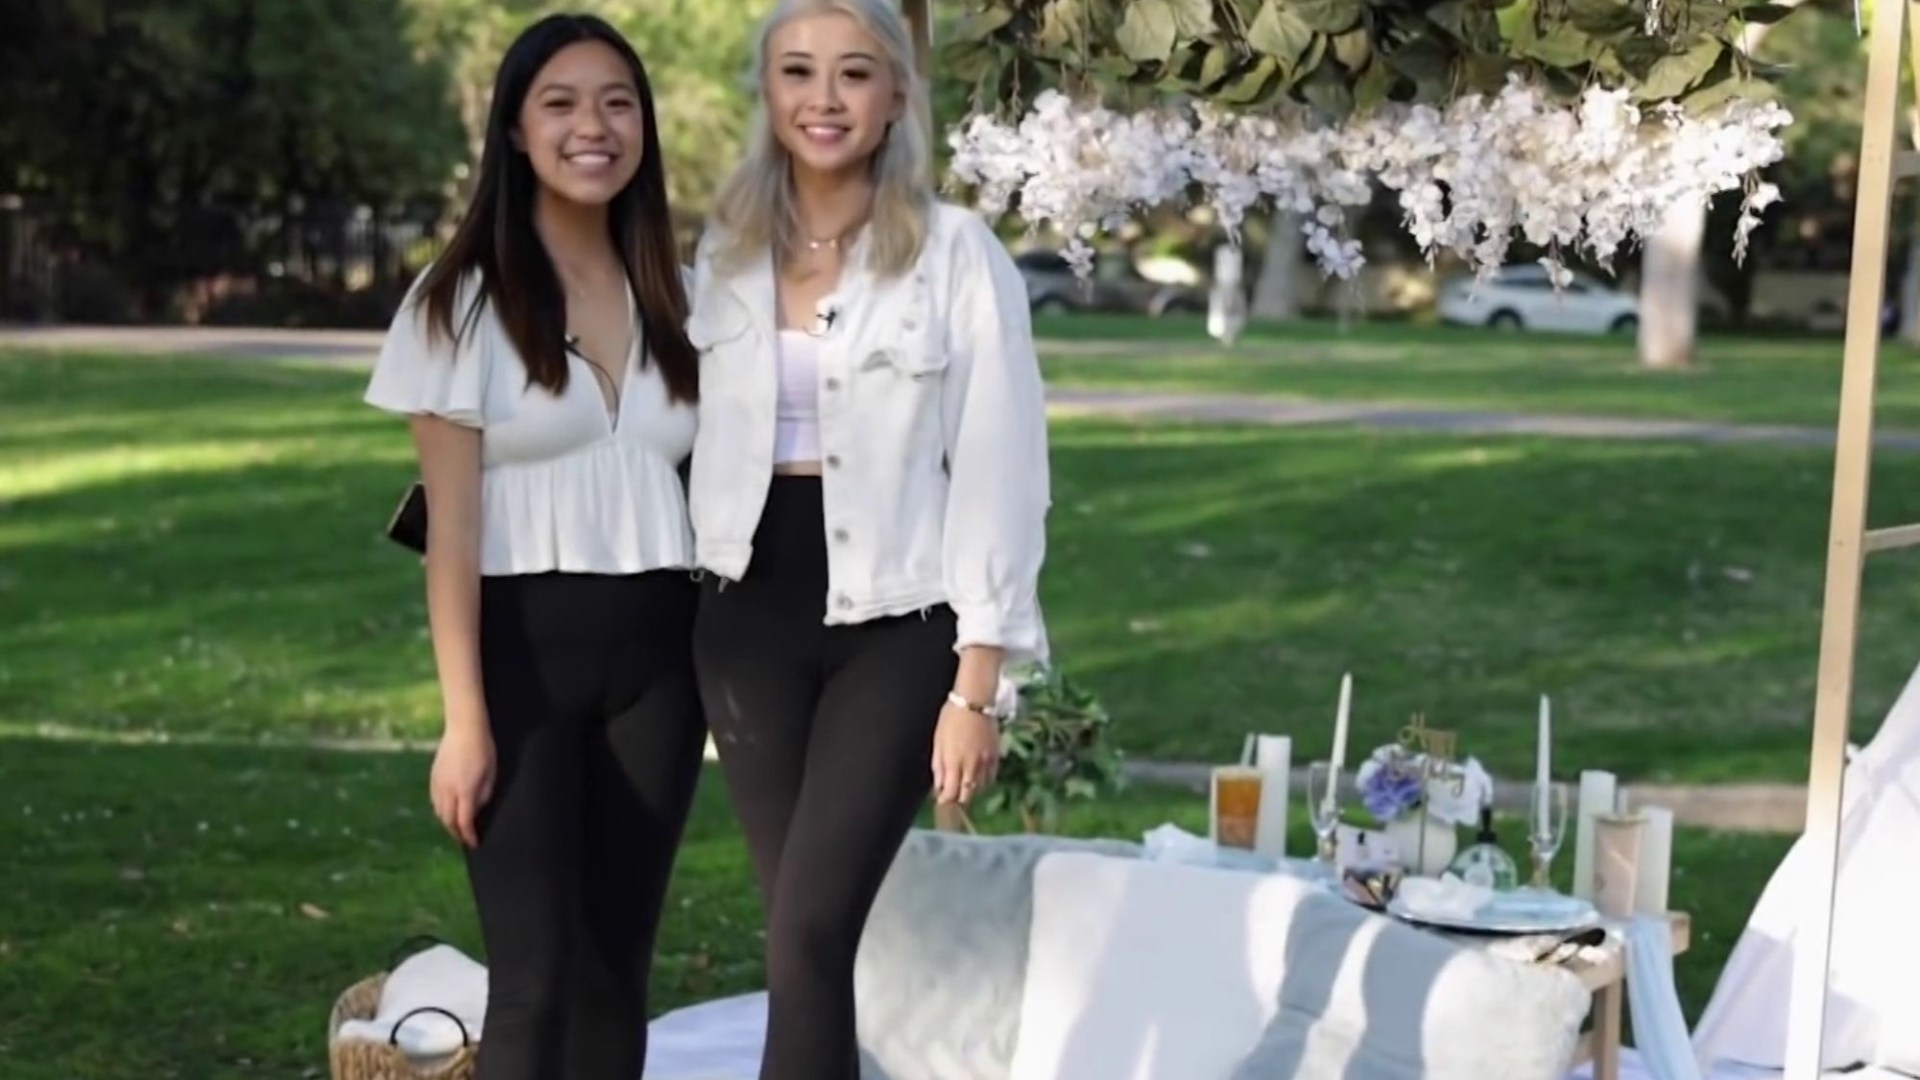 We turned our love of picnics into an epic side hustle – it makes us 11.5k a MONTH, we’re only 24 & 25 [Video]